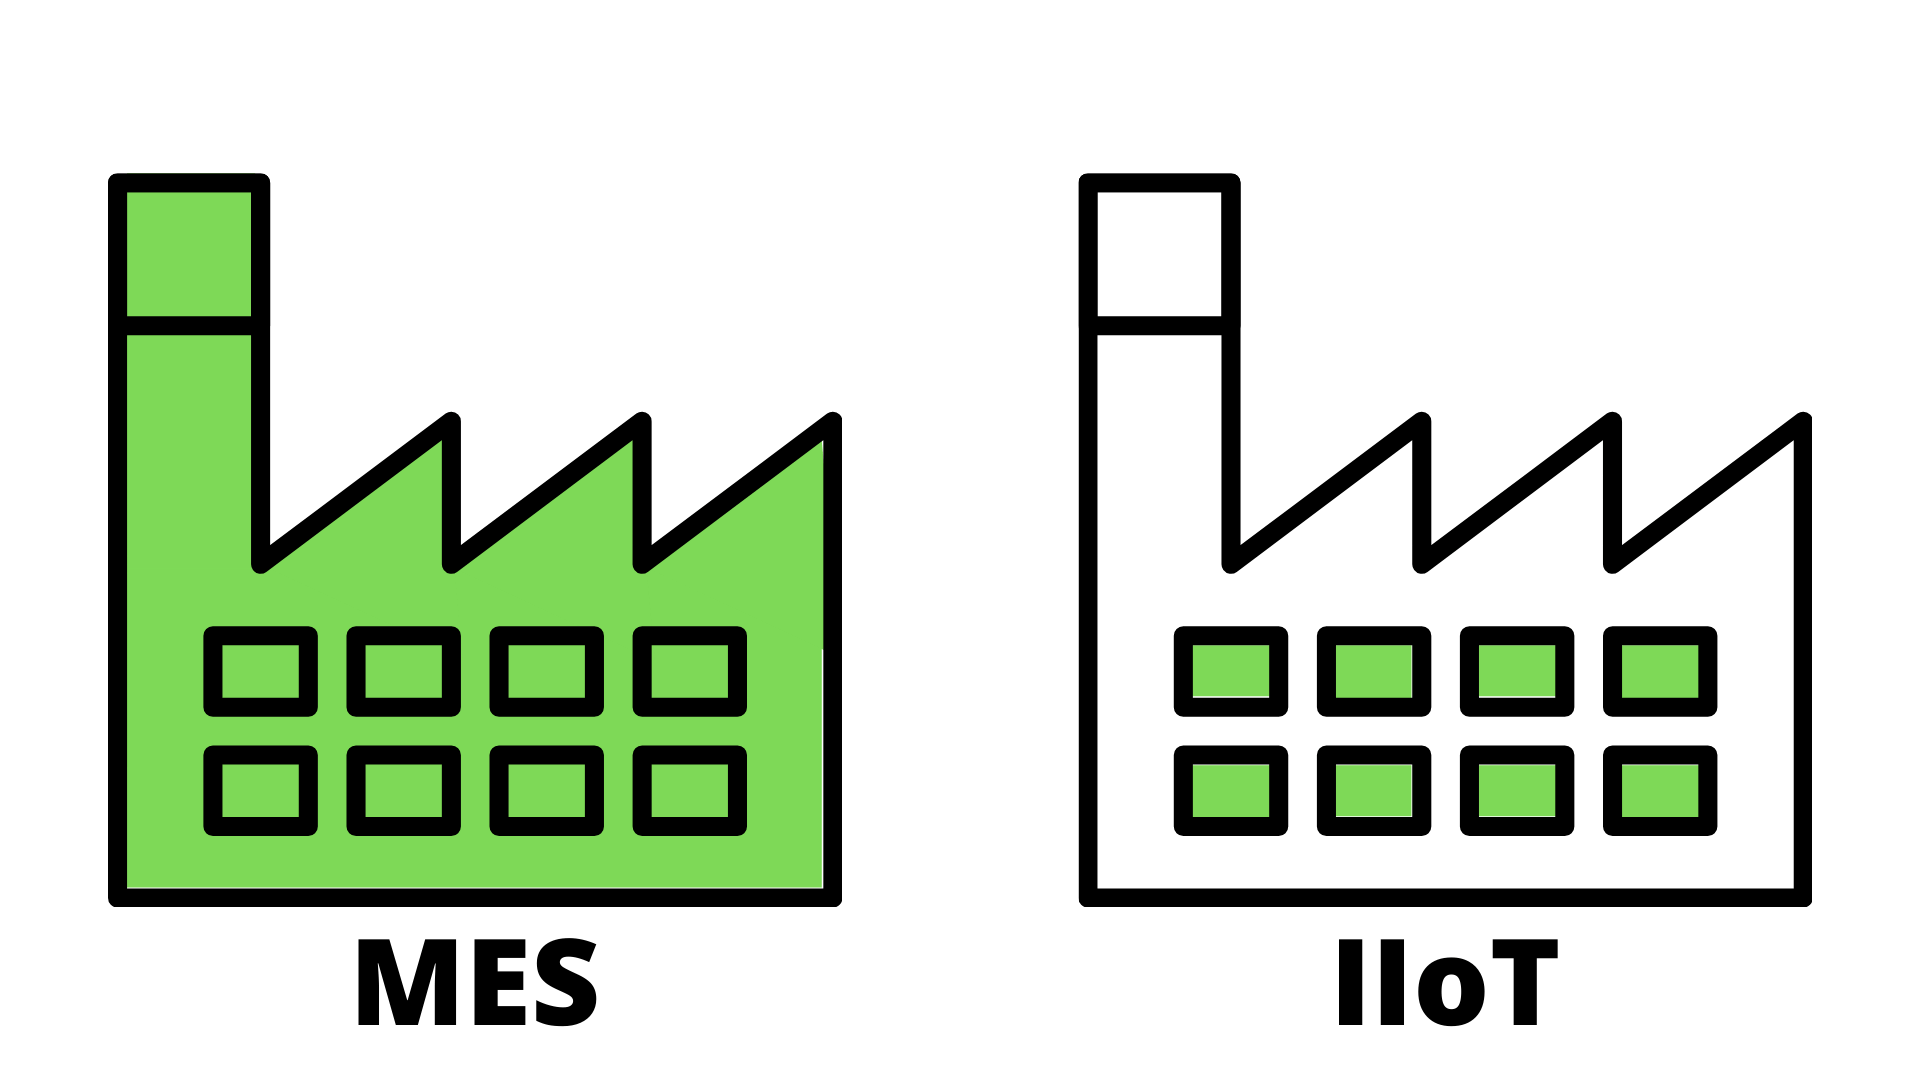 This graphic shows the differences between two plant floor solutions, mes vs iot. 